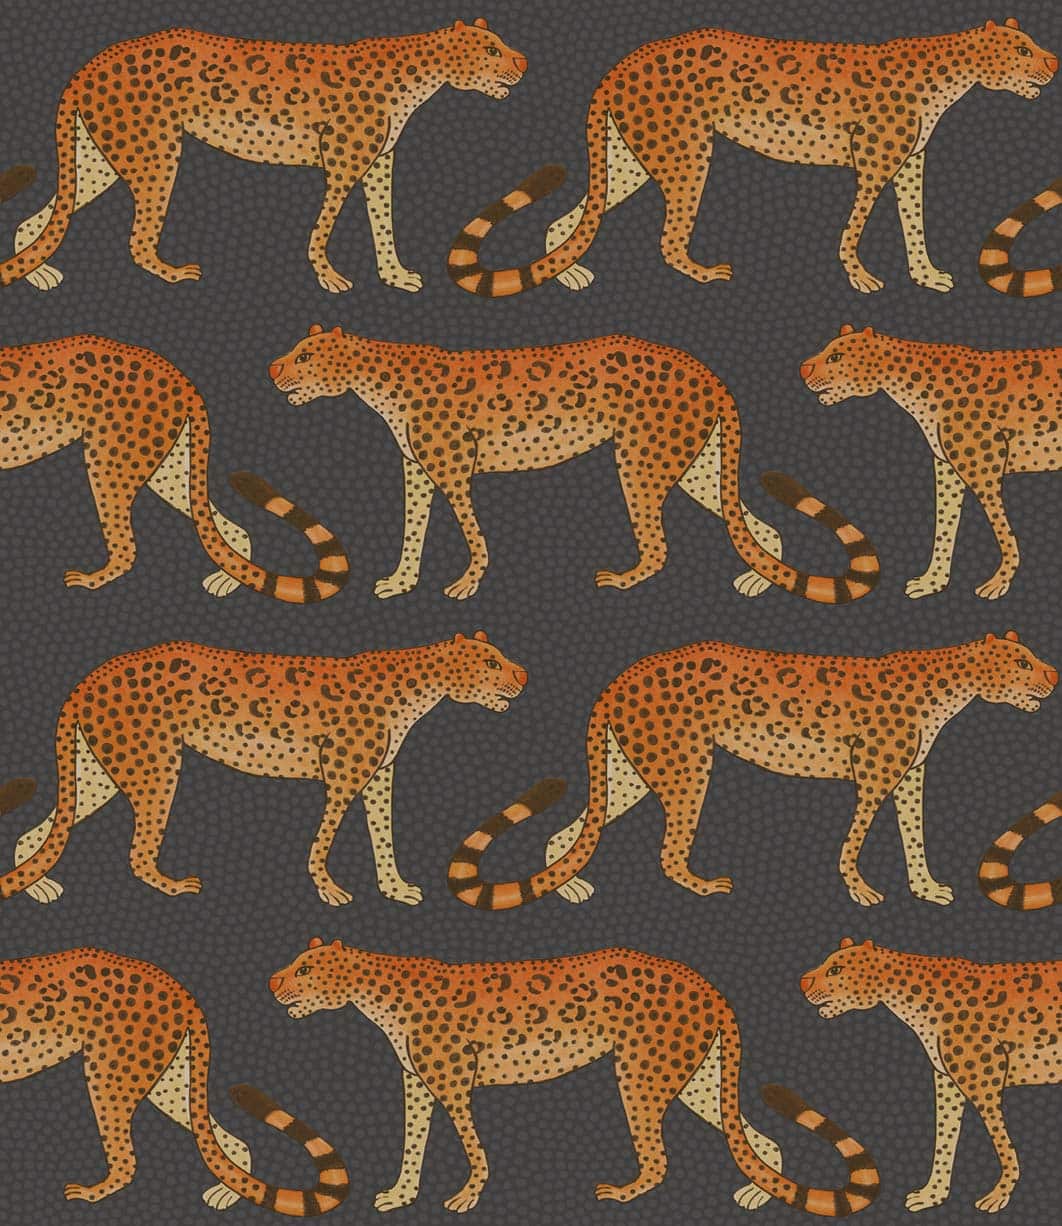 Leopard Walk Tapete - 109/2008 - Cole&Son - The Ardmore Collection